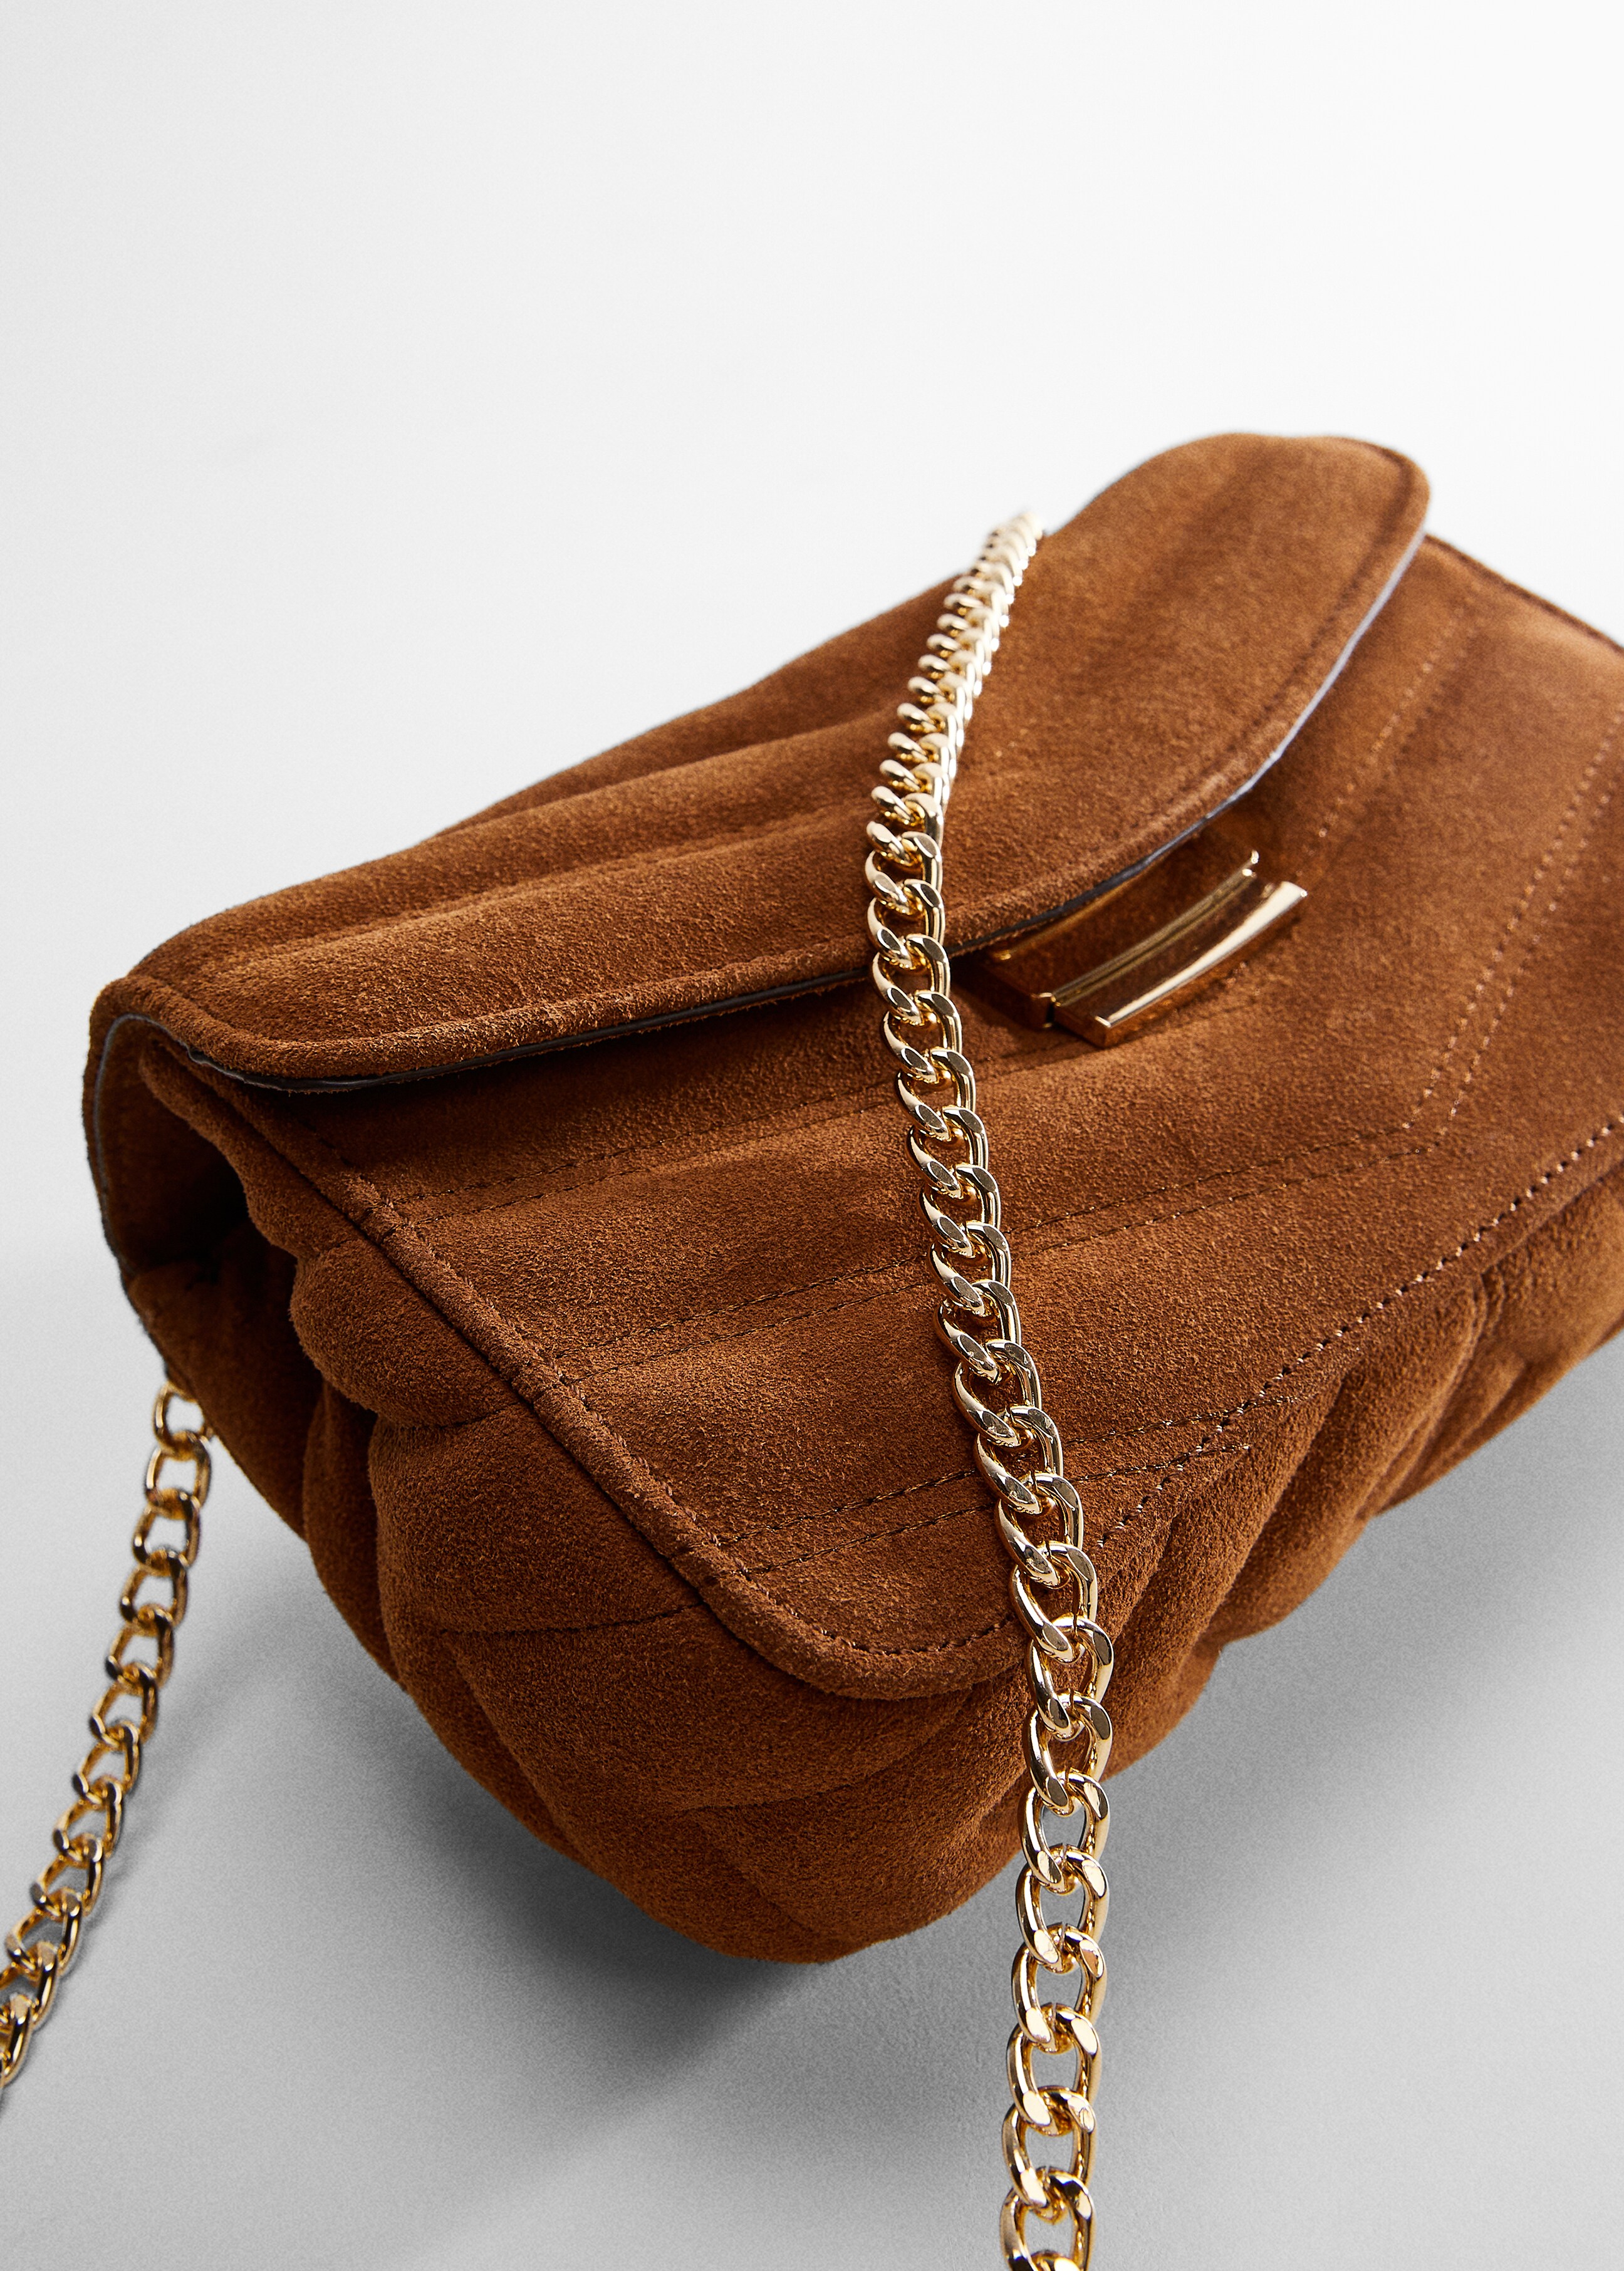 Quilted leather bag - Details of the article 5